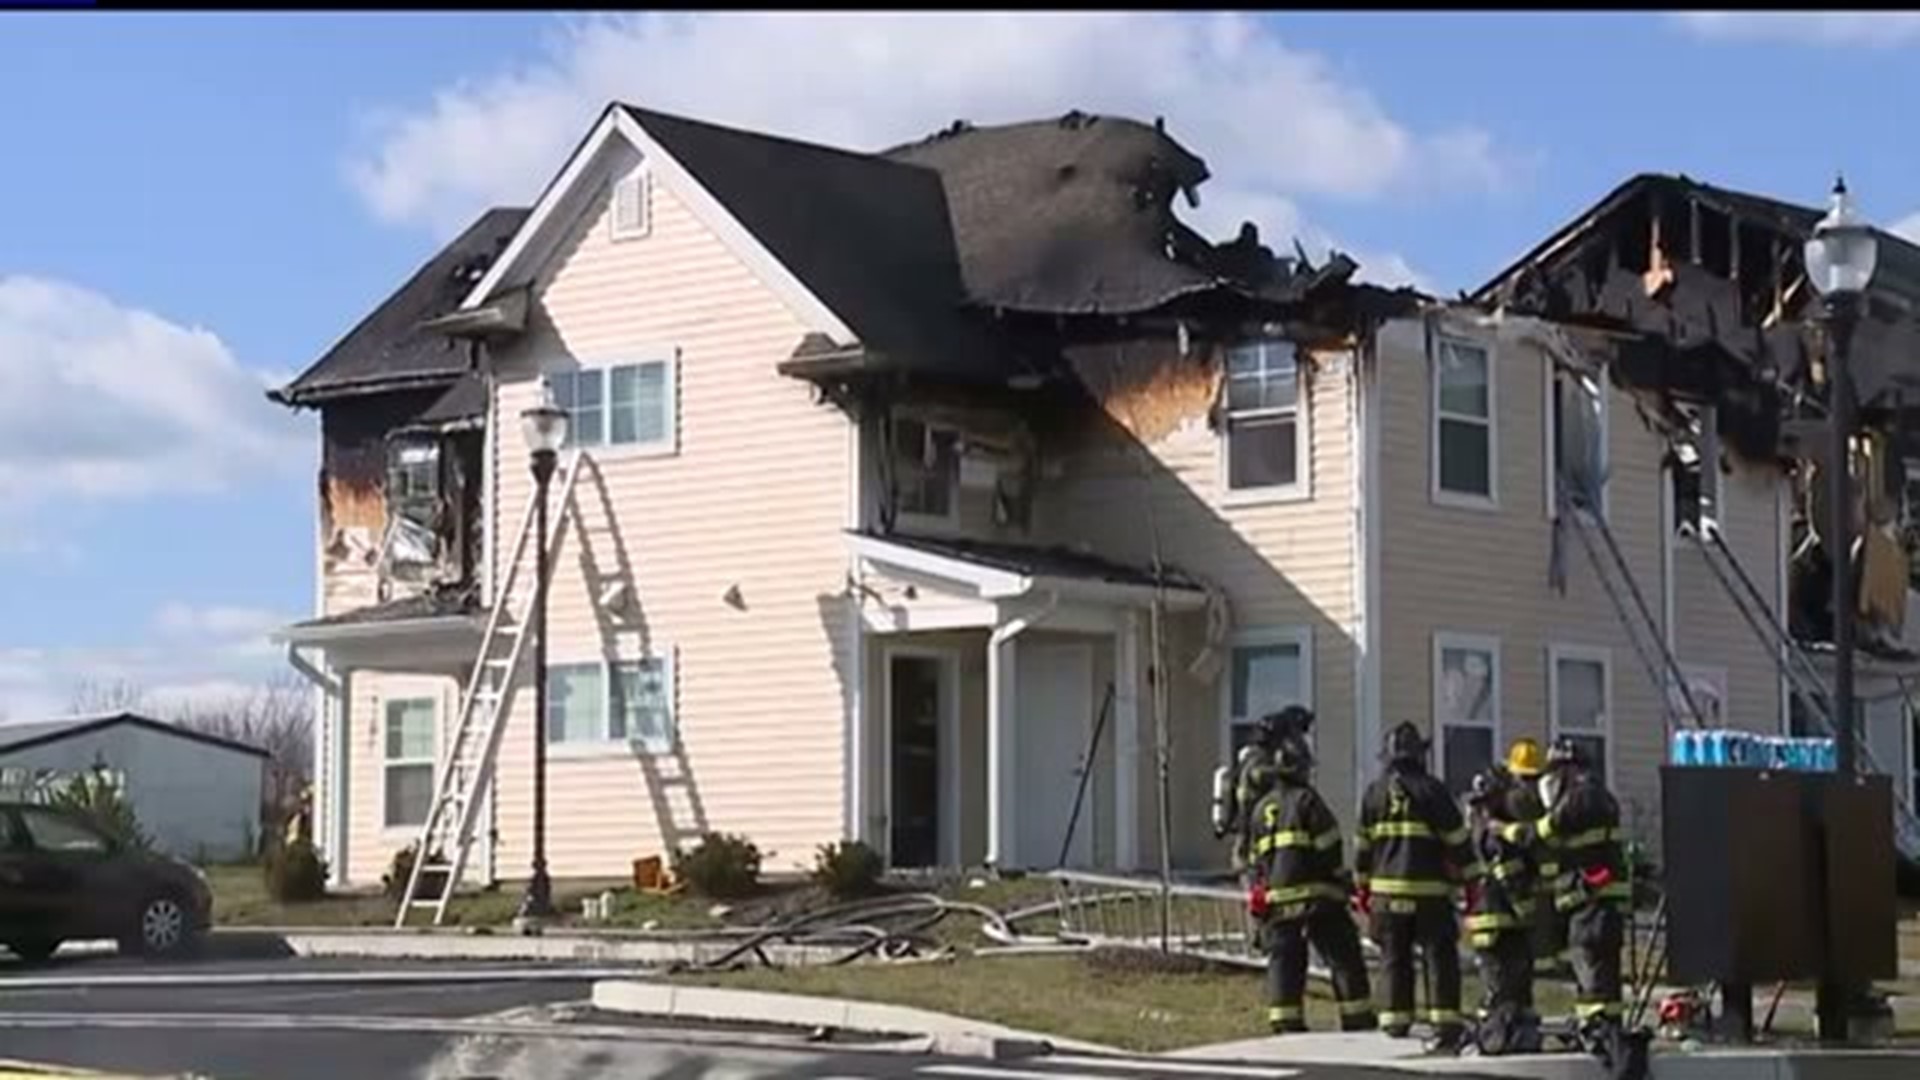 Six apartments, 24 people impacted by fire in Pequea Township